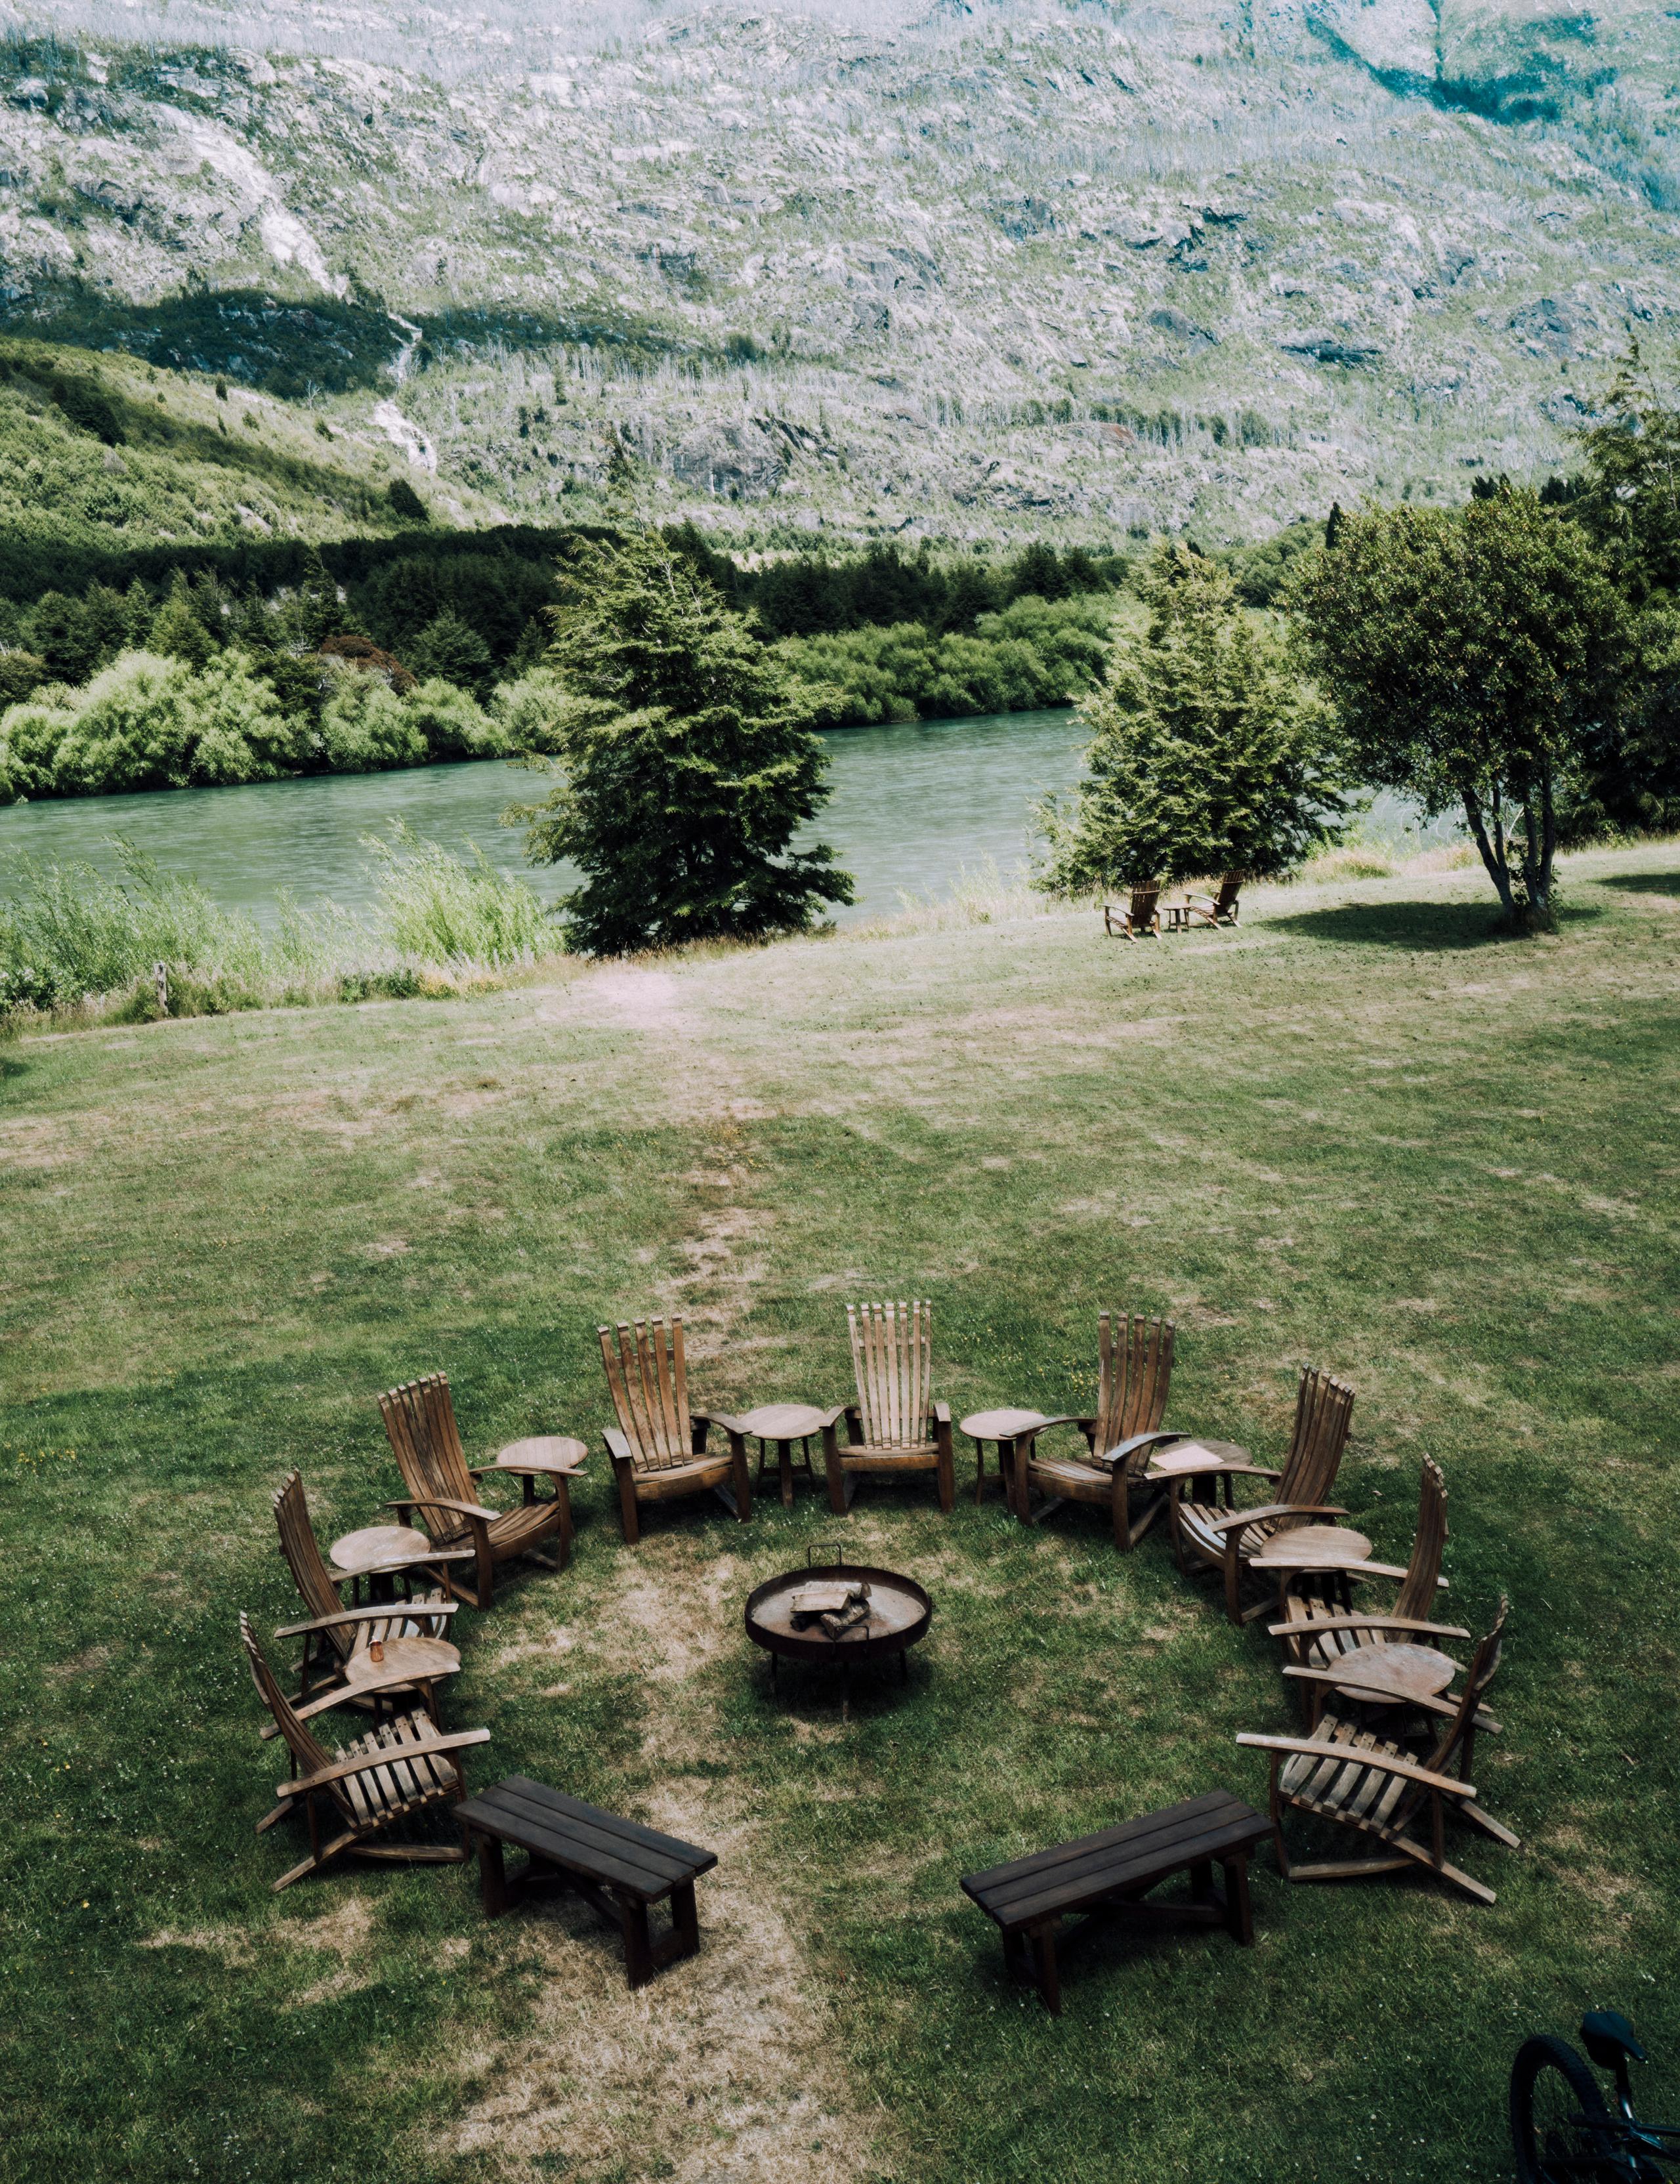 A cozy outdoor camp seating area.